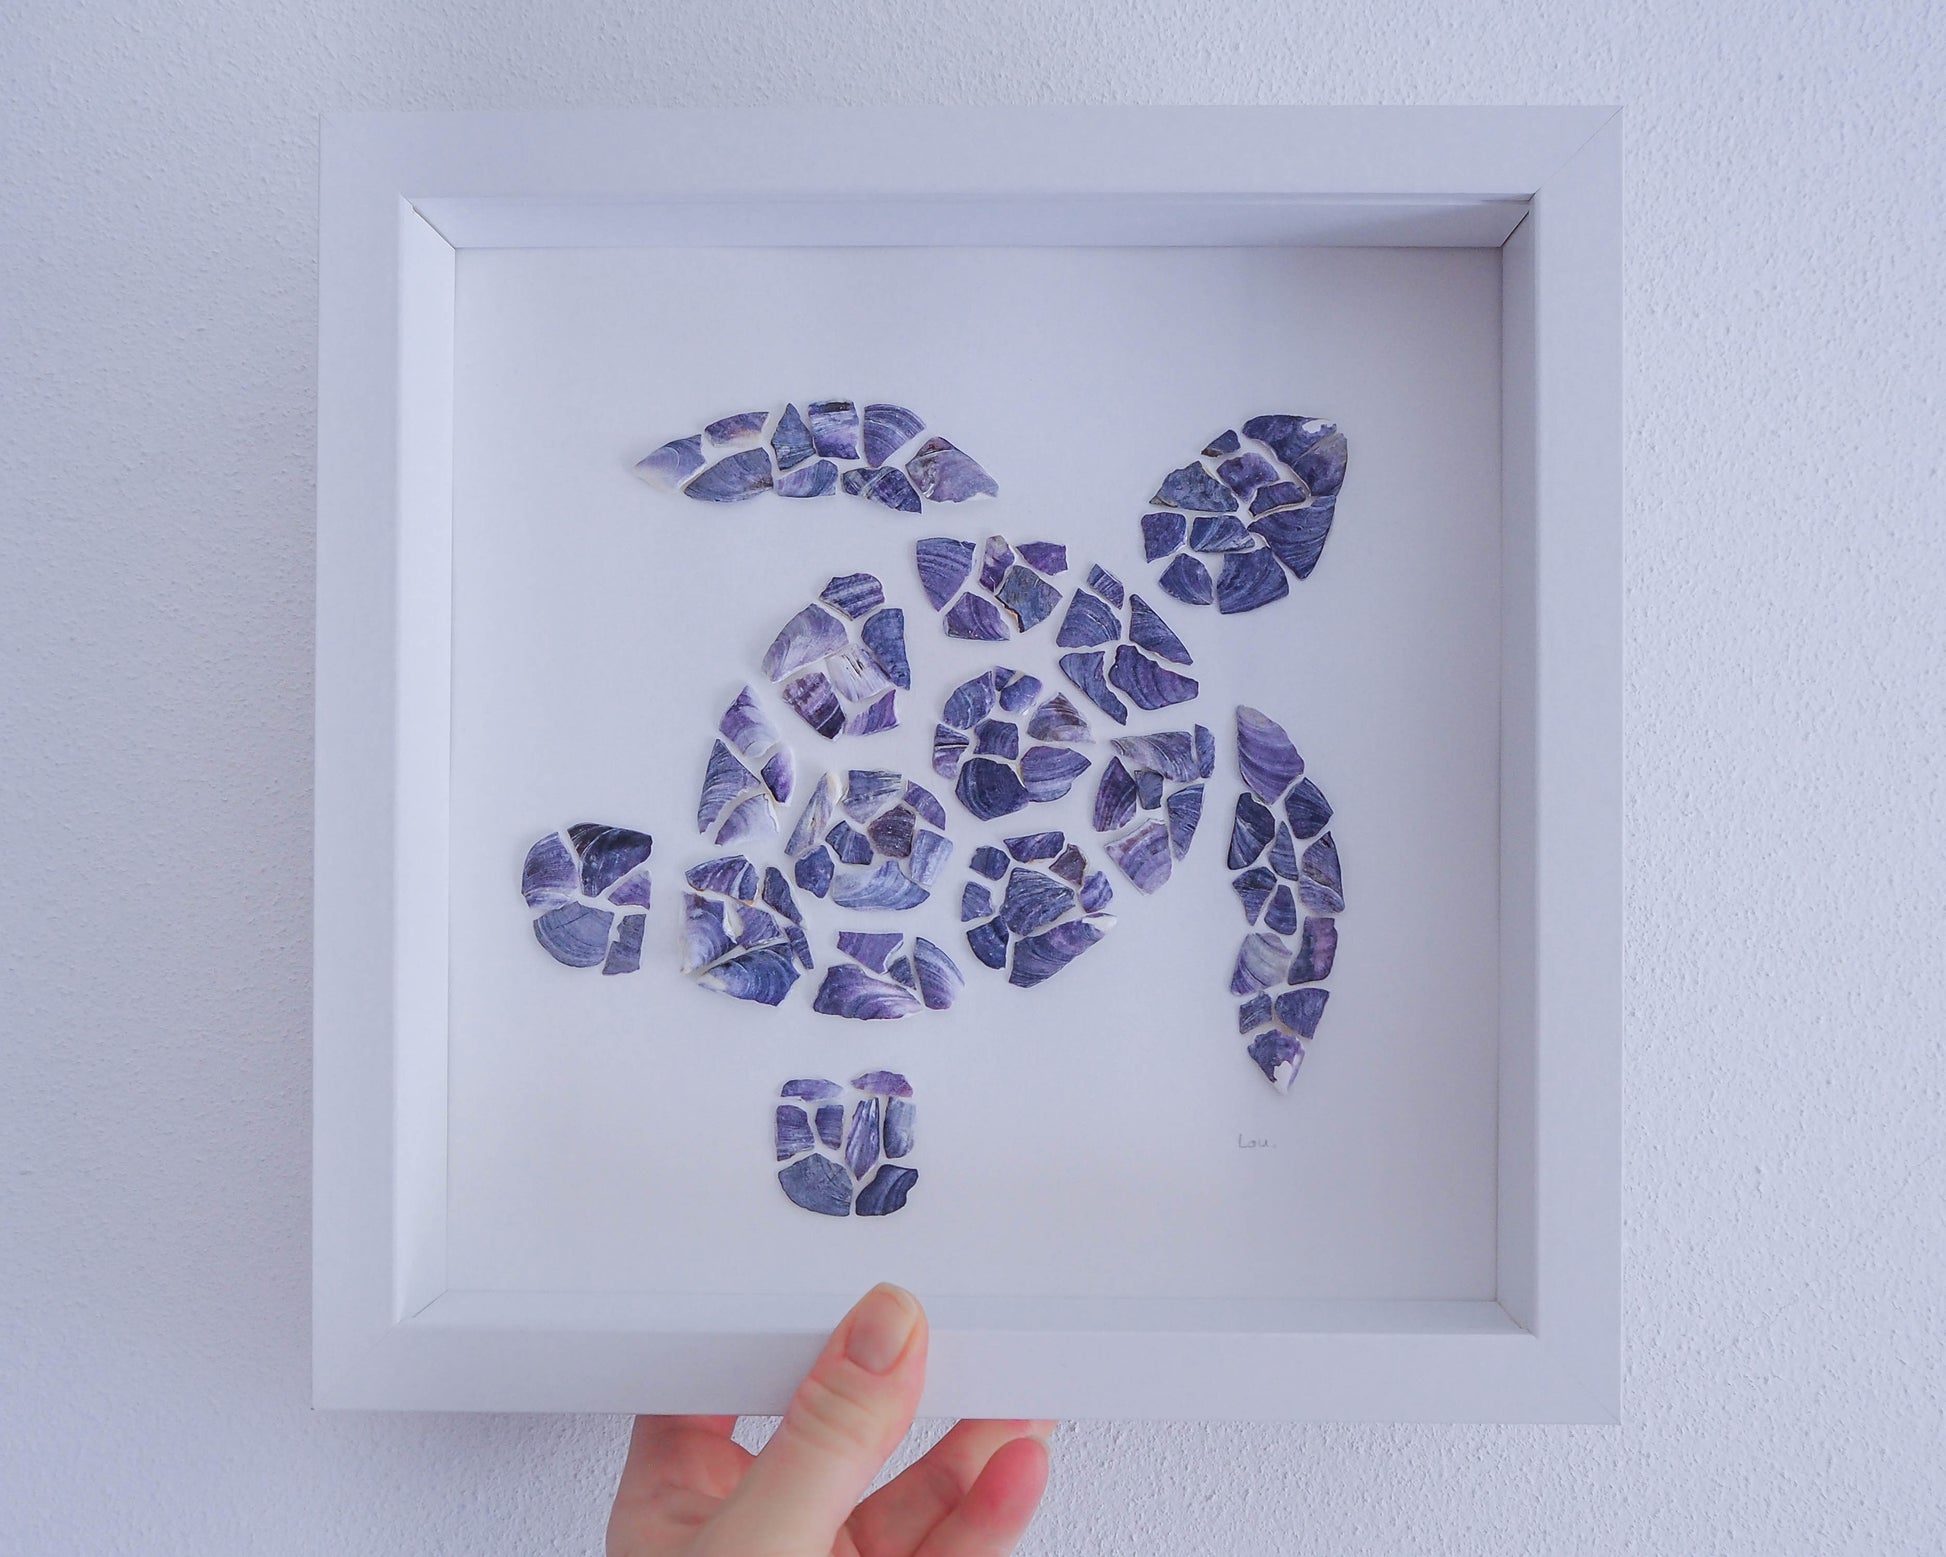 Portuguese Mussel Shells Turtle Art: Genuine mussel shells sourced from Portugal's coastal waters, highlighting their natural texture and colors. Sea by lou, Authentic Shells, Beach Decor, Natural Beauty